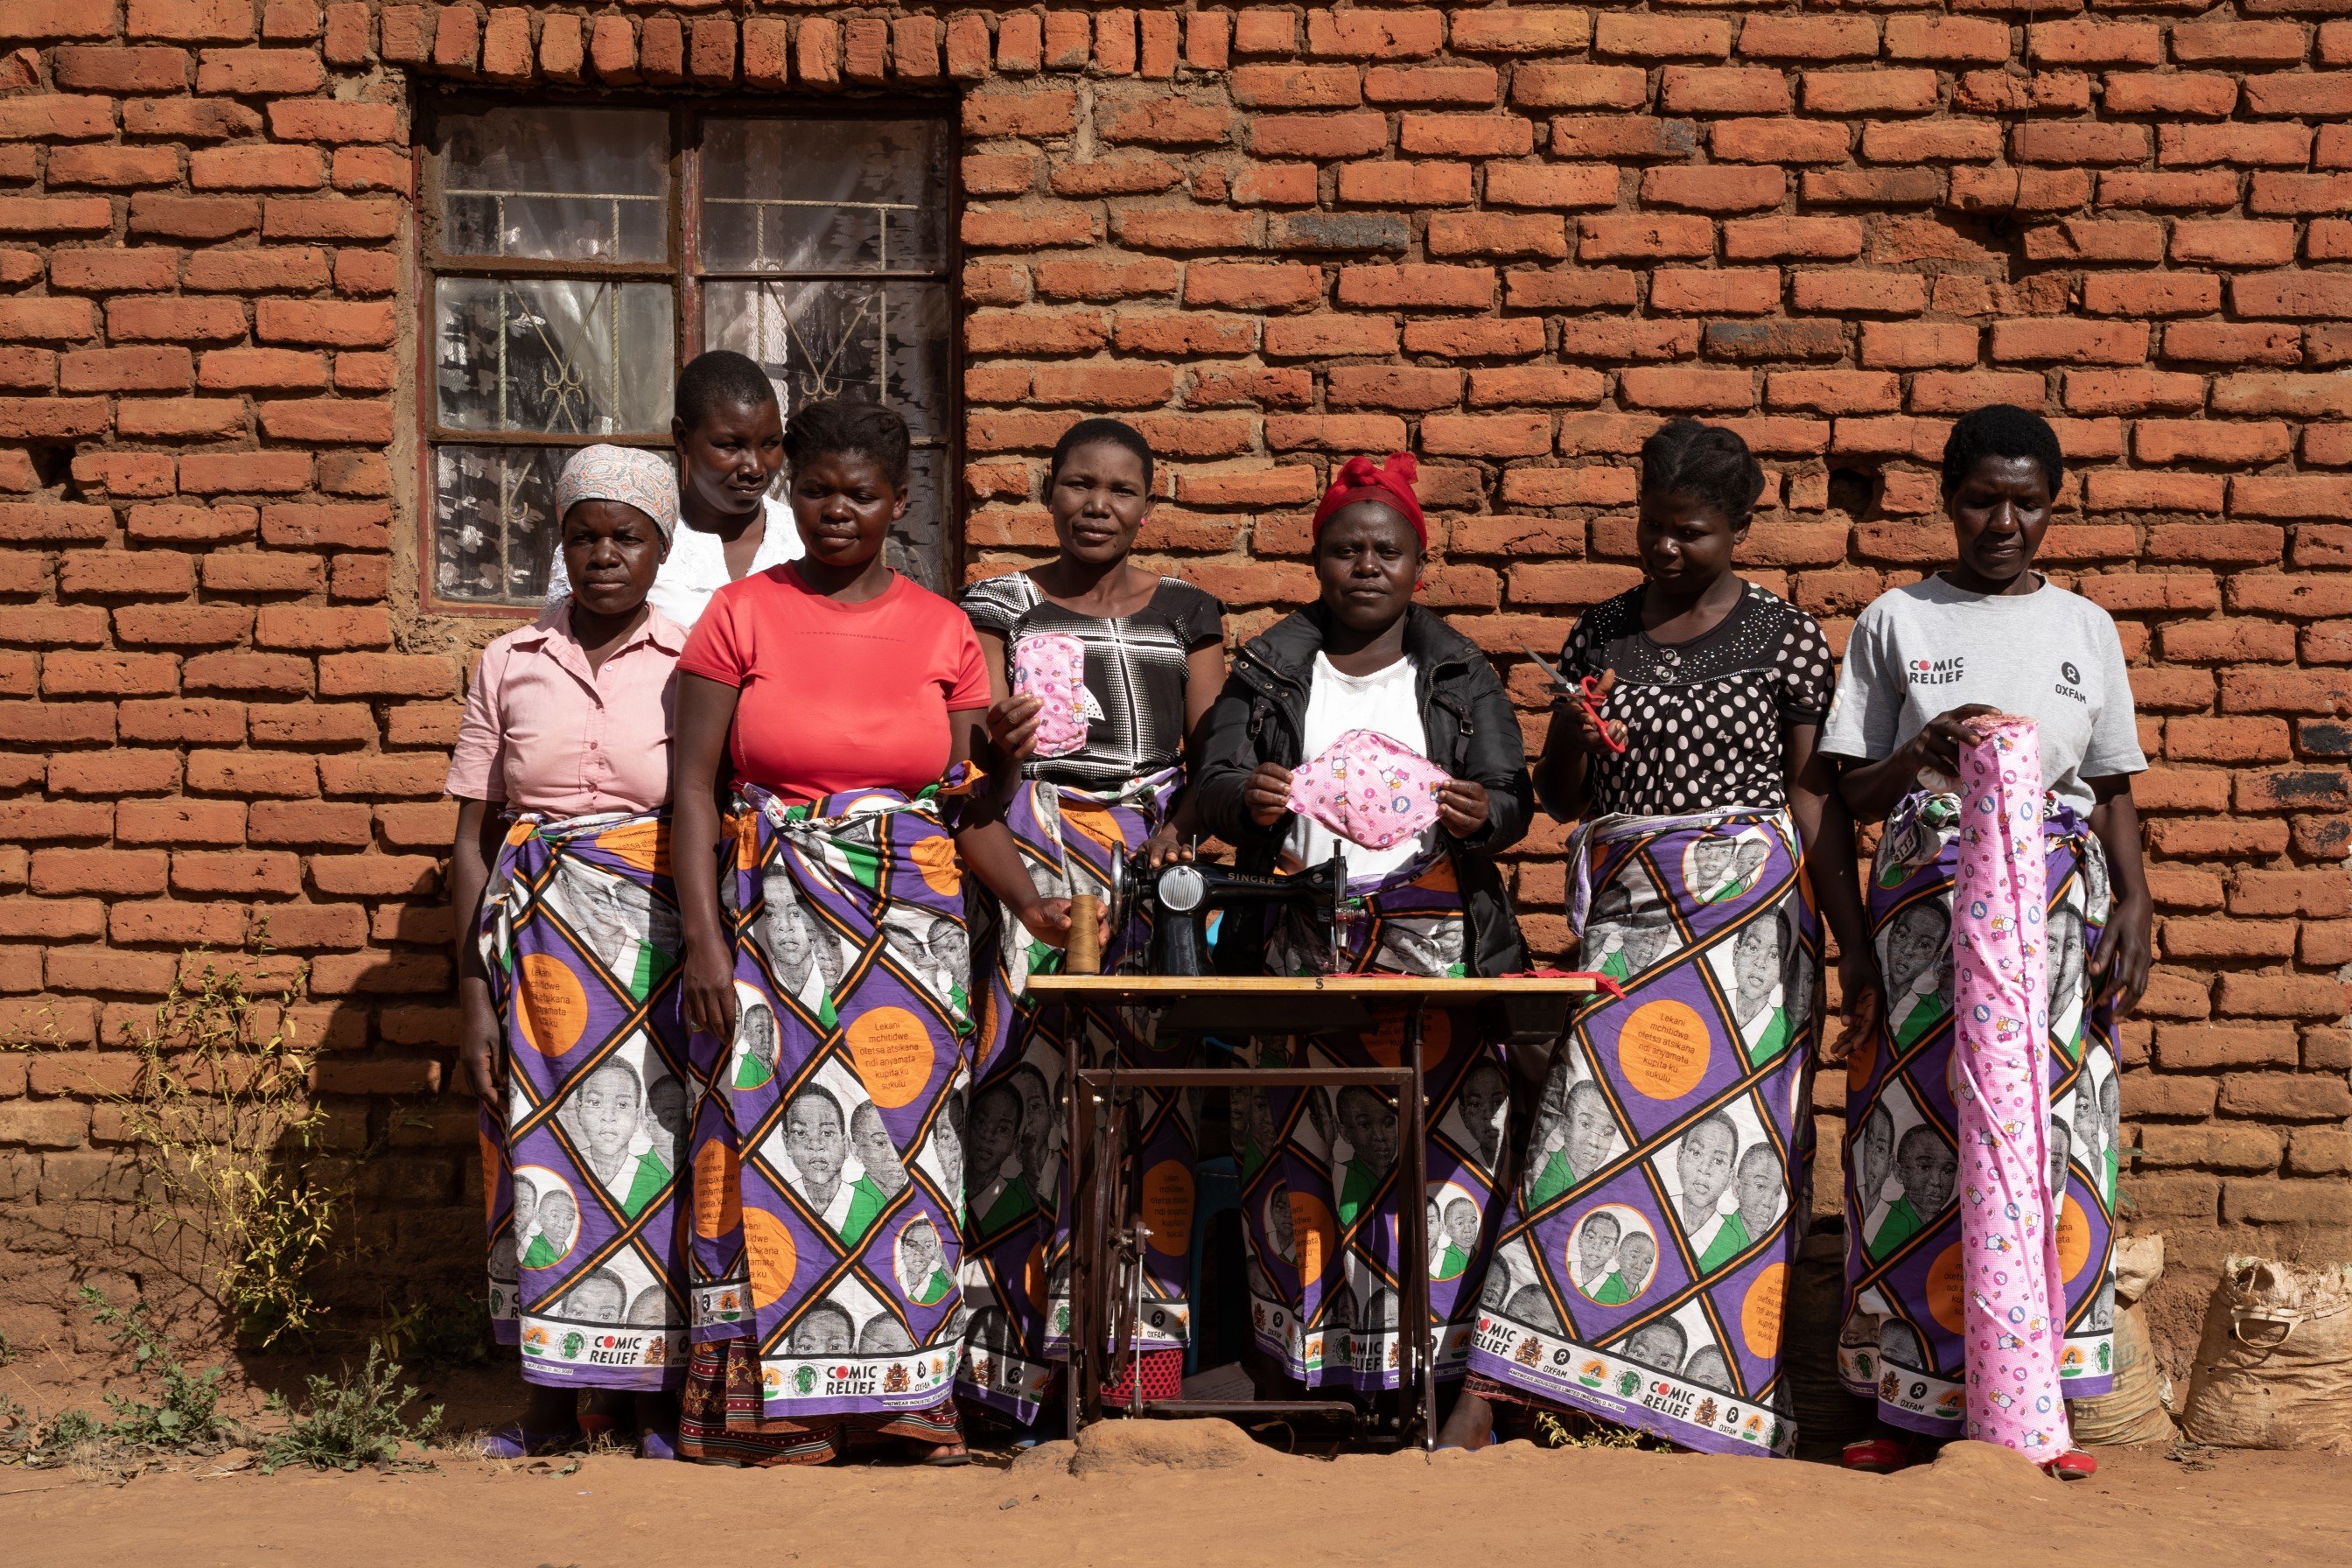 The mothers' group with a sewing machine and reusable sanitary napkin they made.